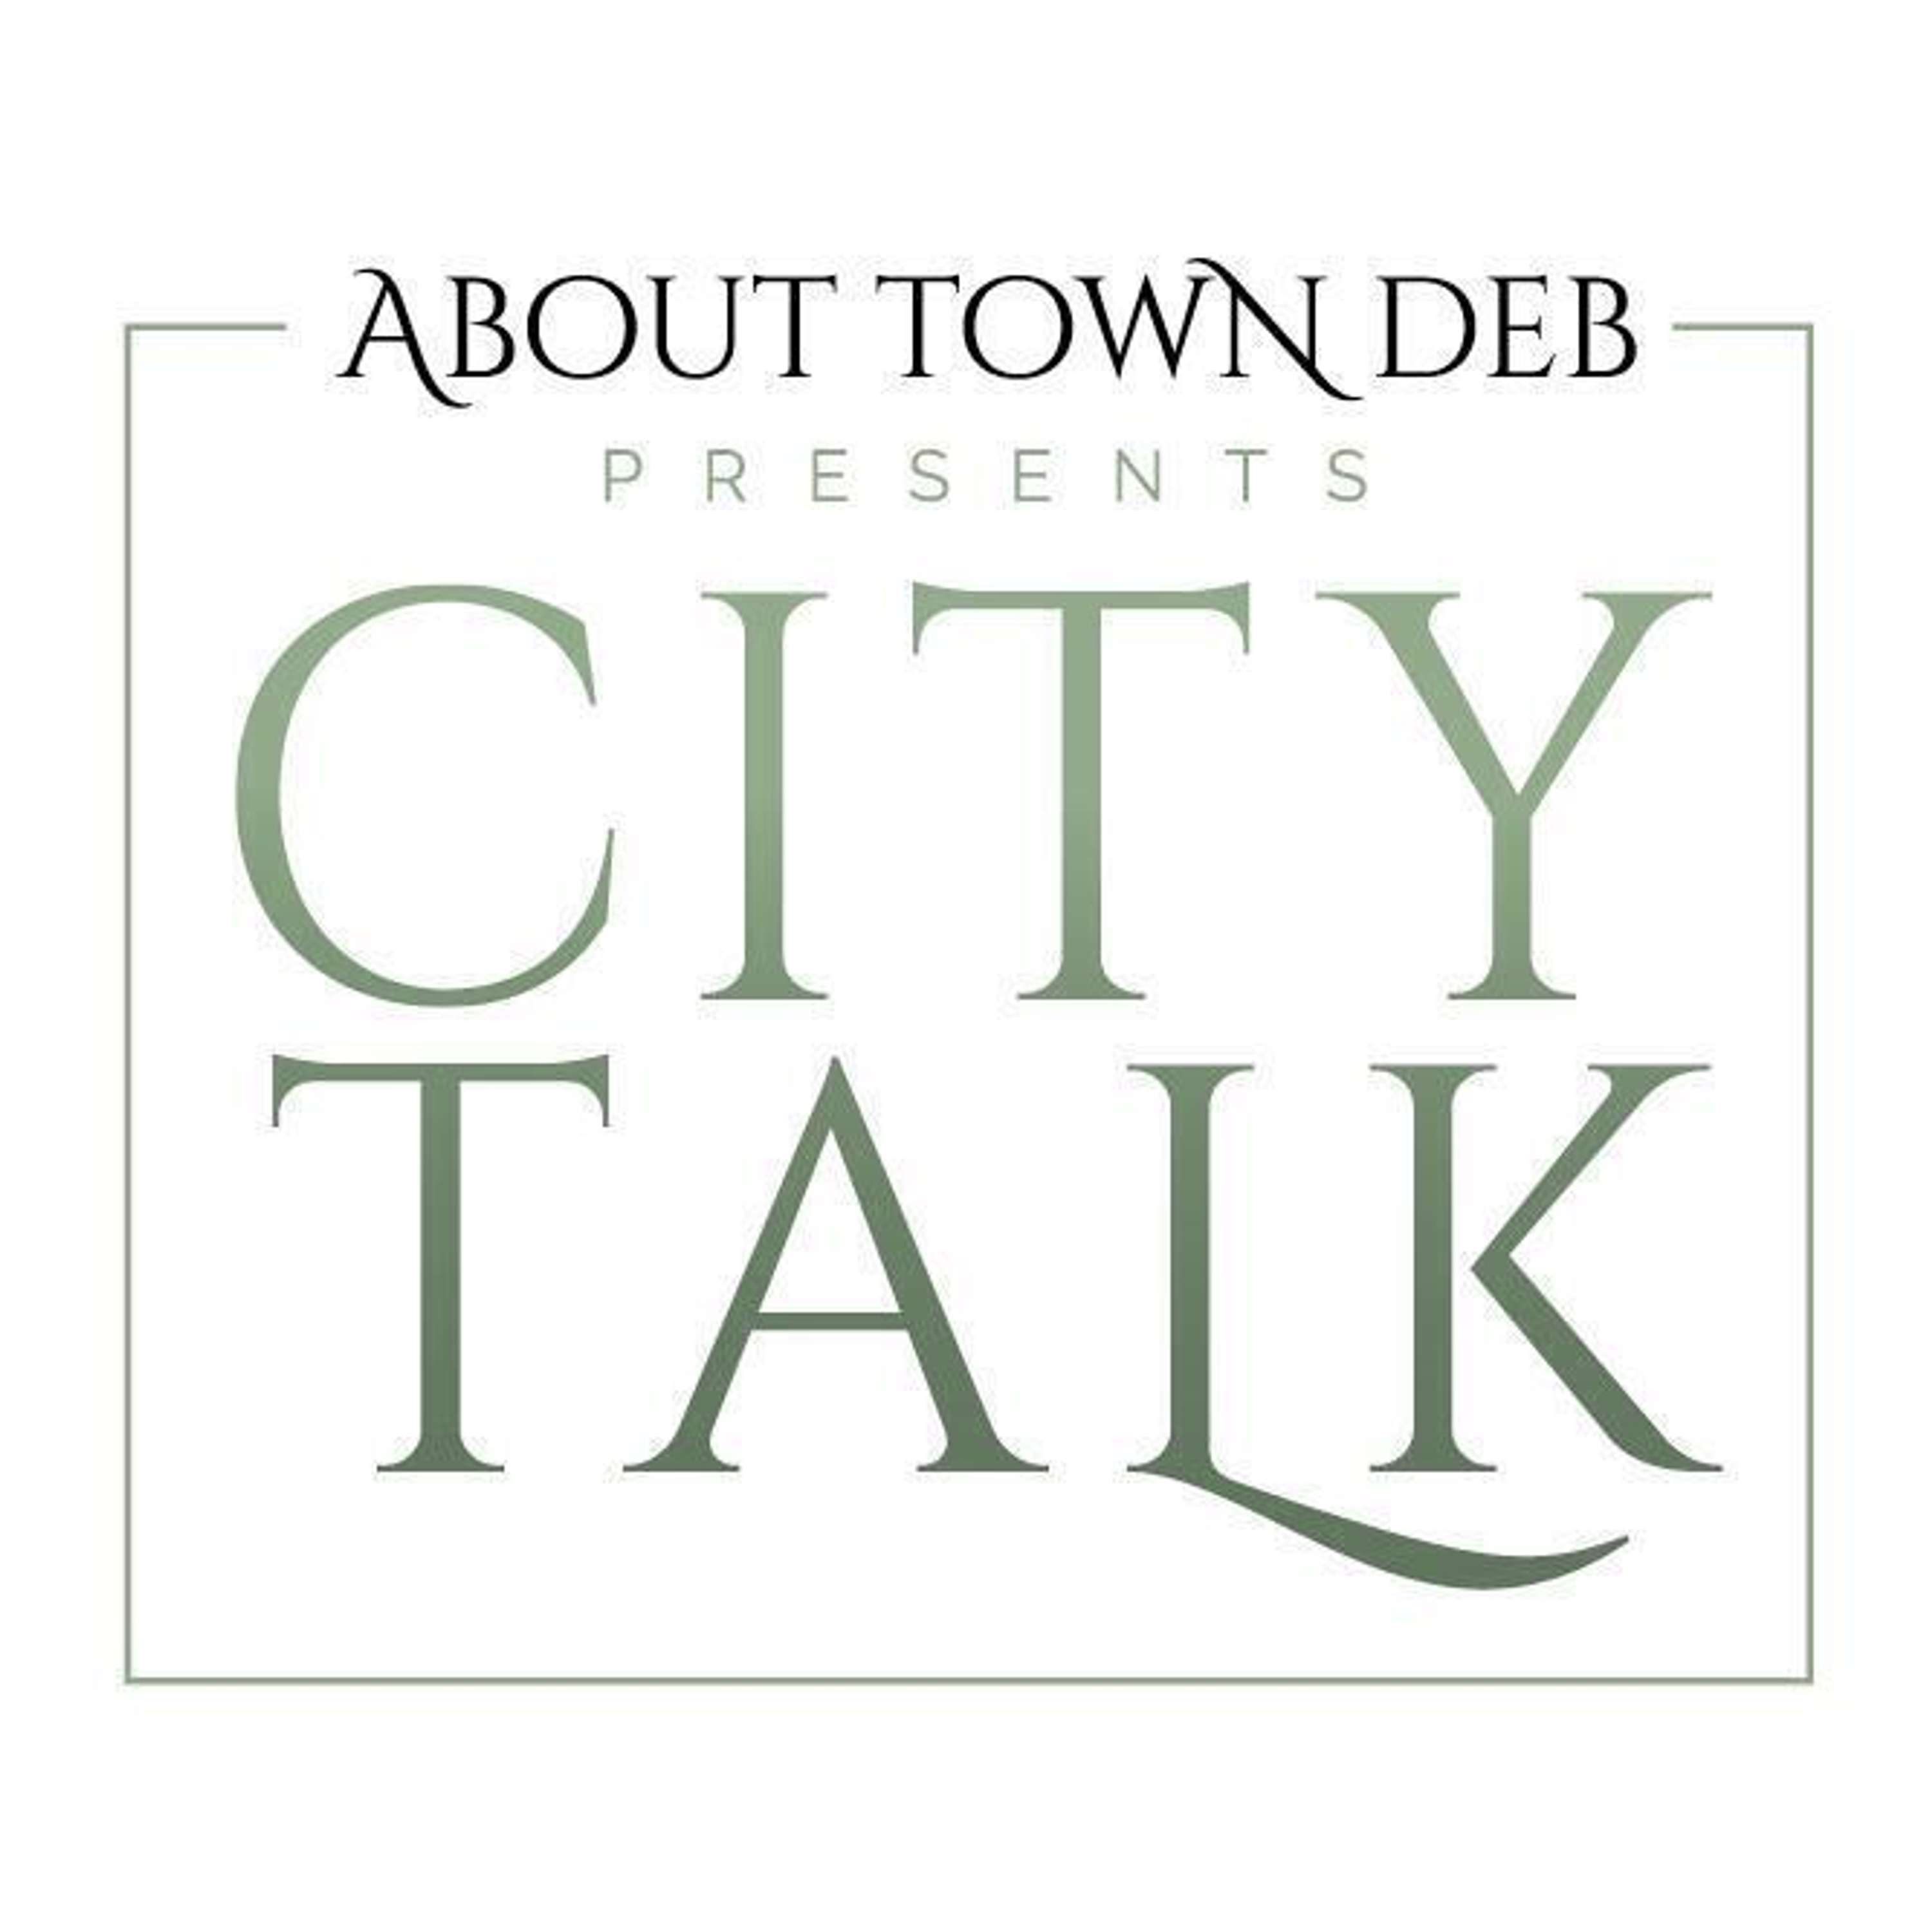 About Town Deb Presents City Talk: Rescues & Remodels with Jaime Chapman (01/18/23)